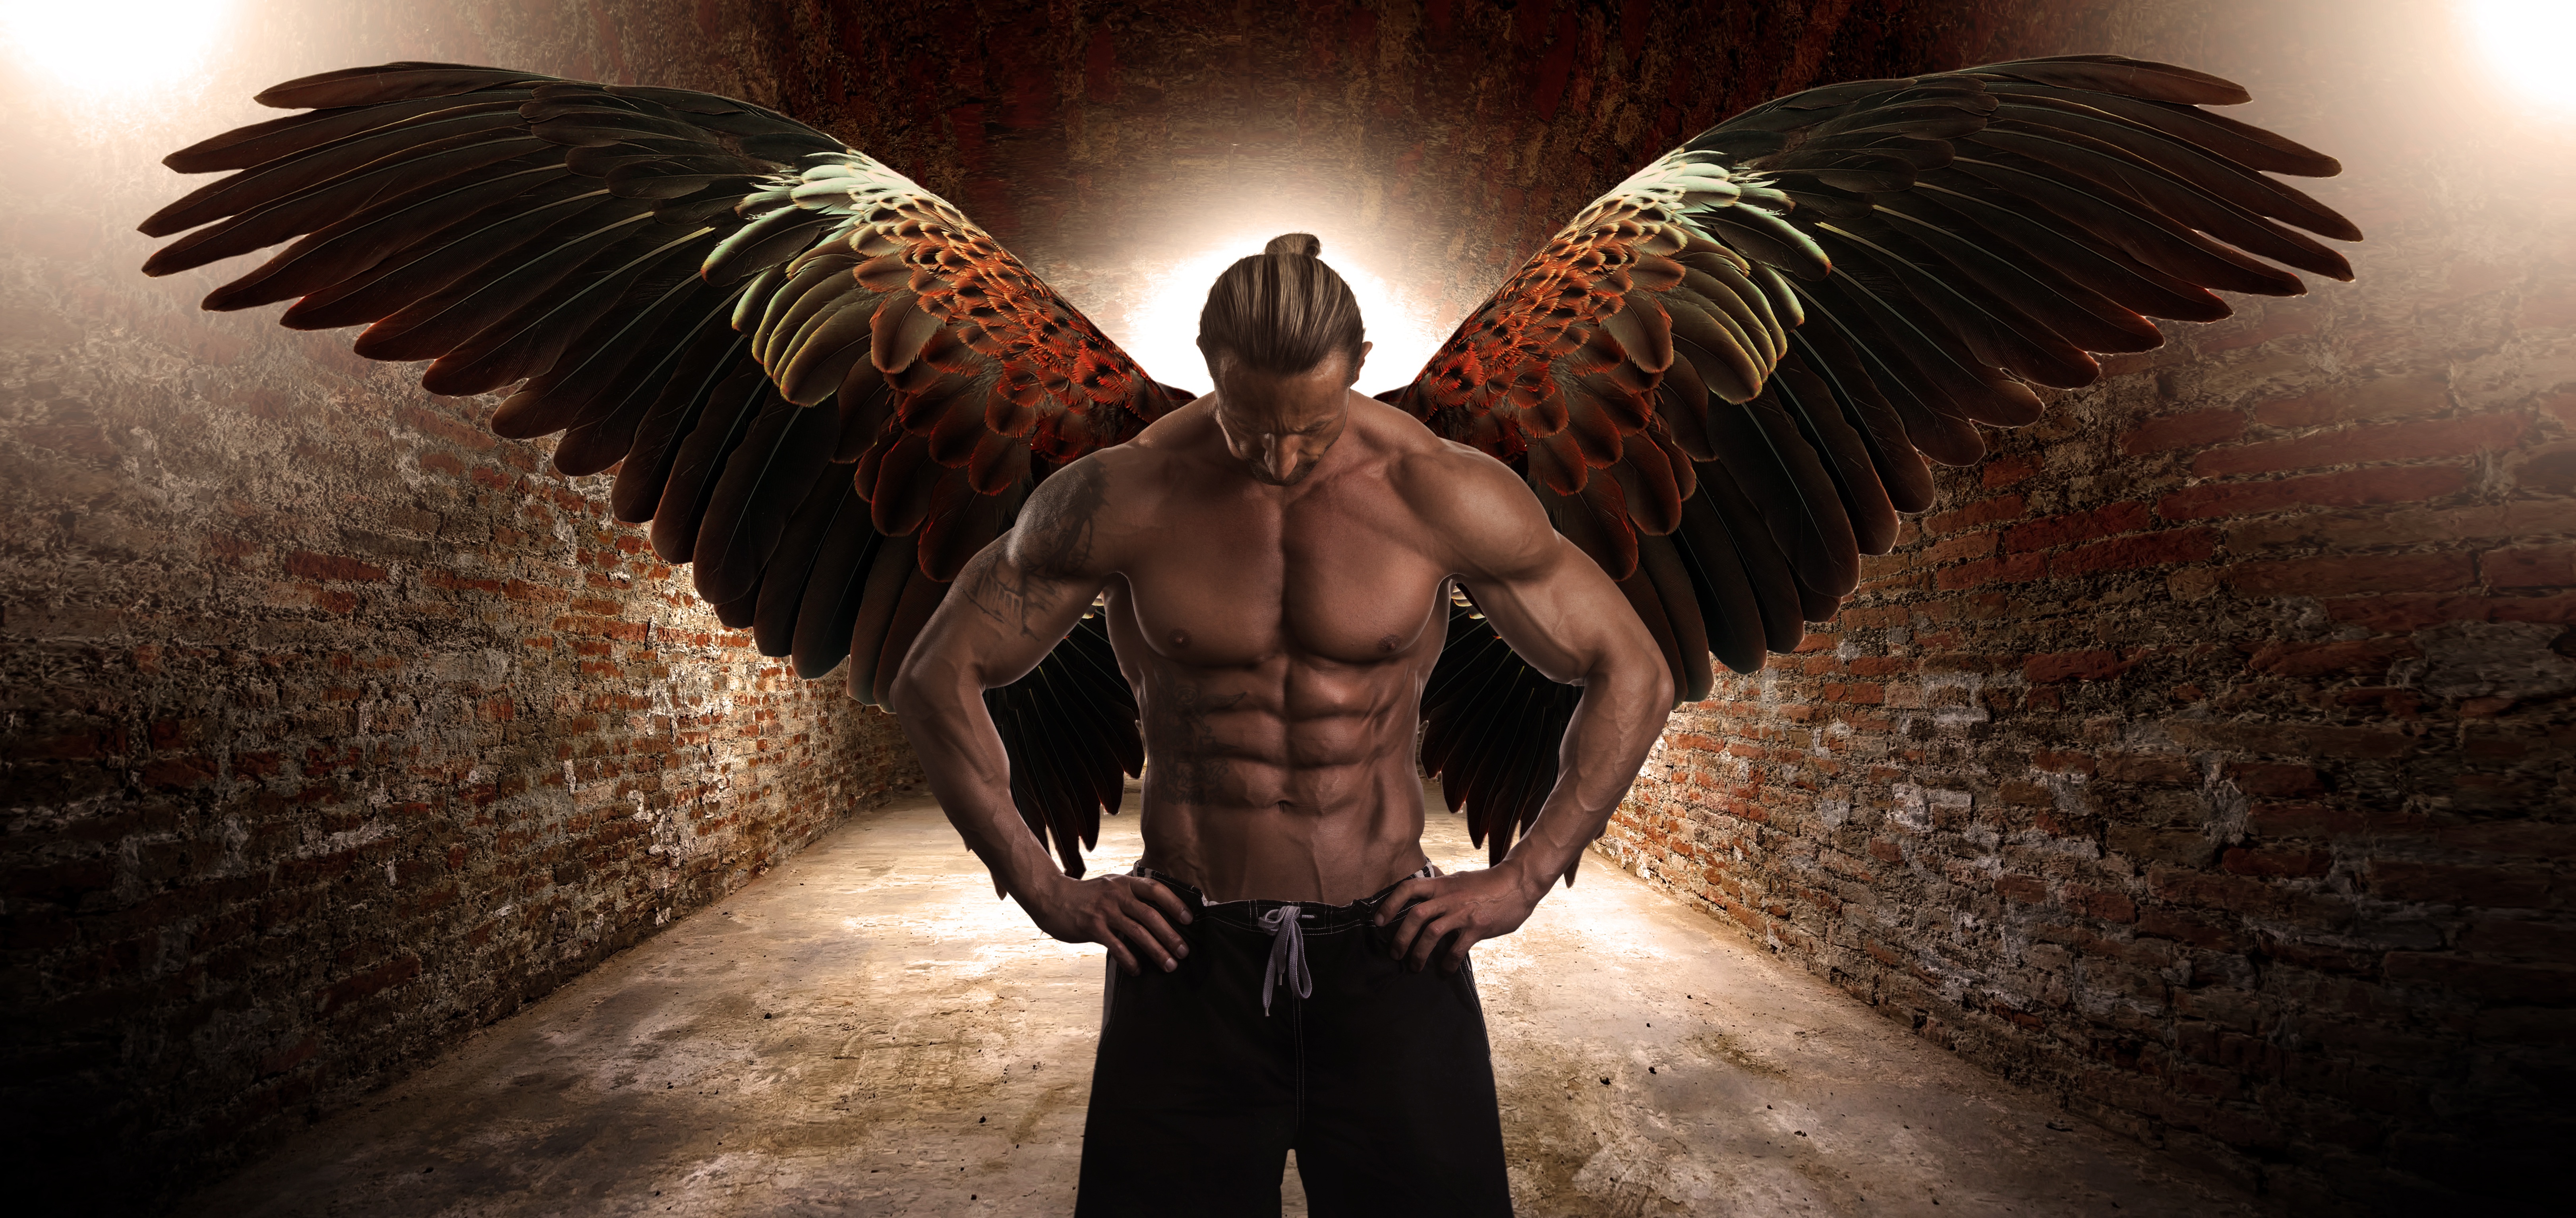 Picture Men Muscle Wings Fantasy Angels Belly Hands 6484x3065